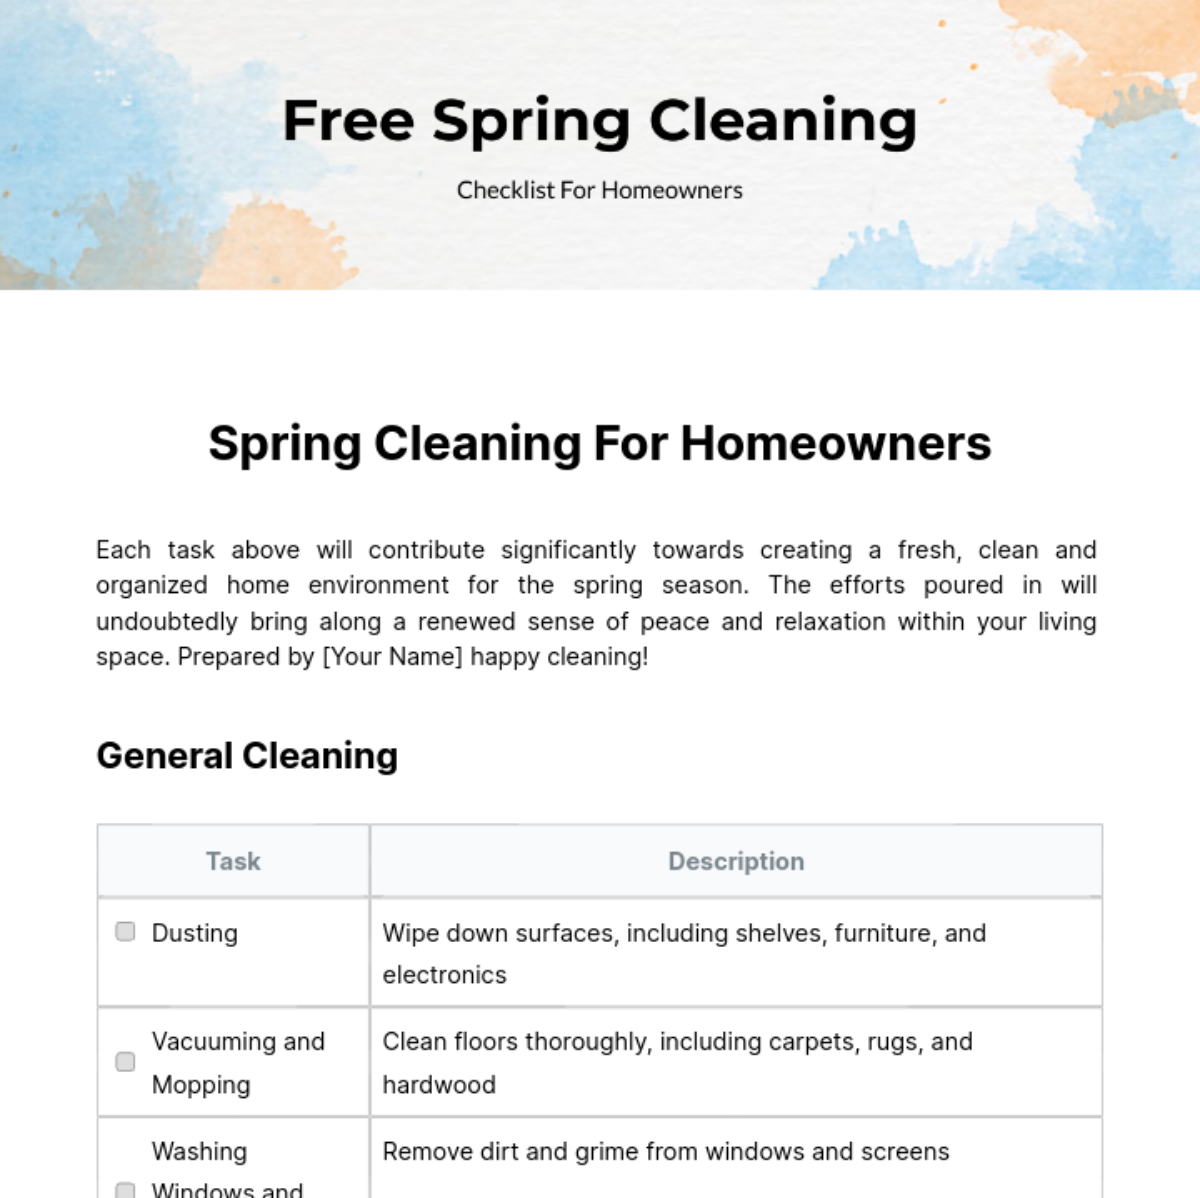 Spring Cleaning Checklist For Homeowners Template